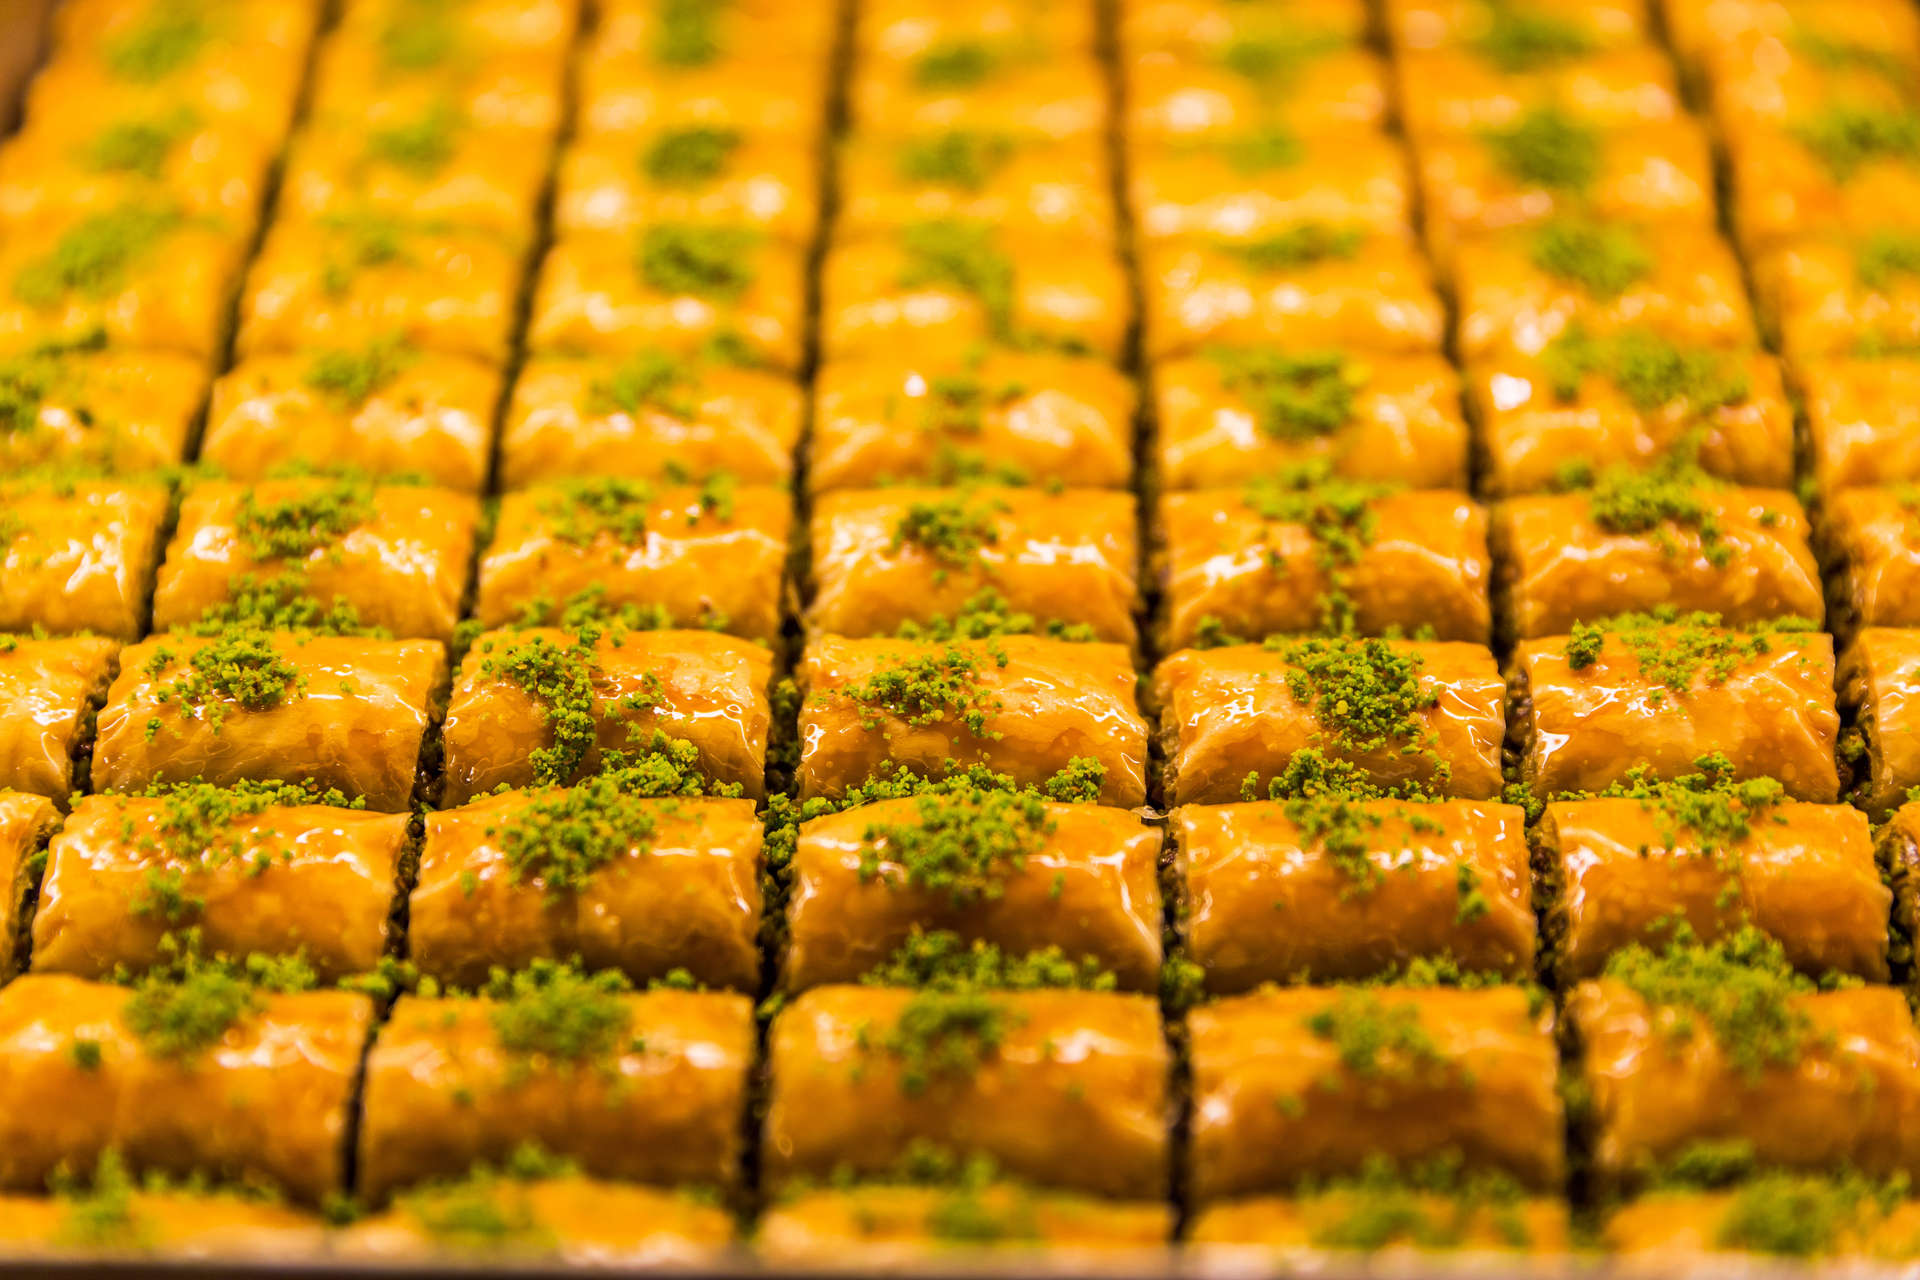 Baklava are buttery layers of filo pastry and crushed nuts drizzled in syrupy honey